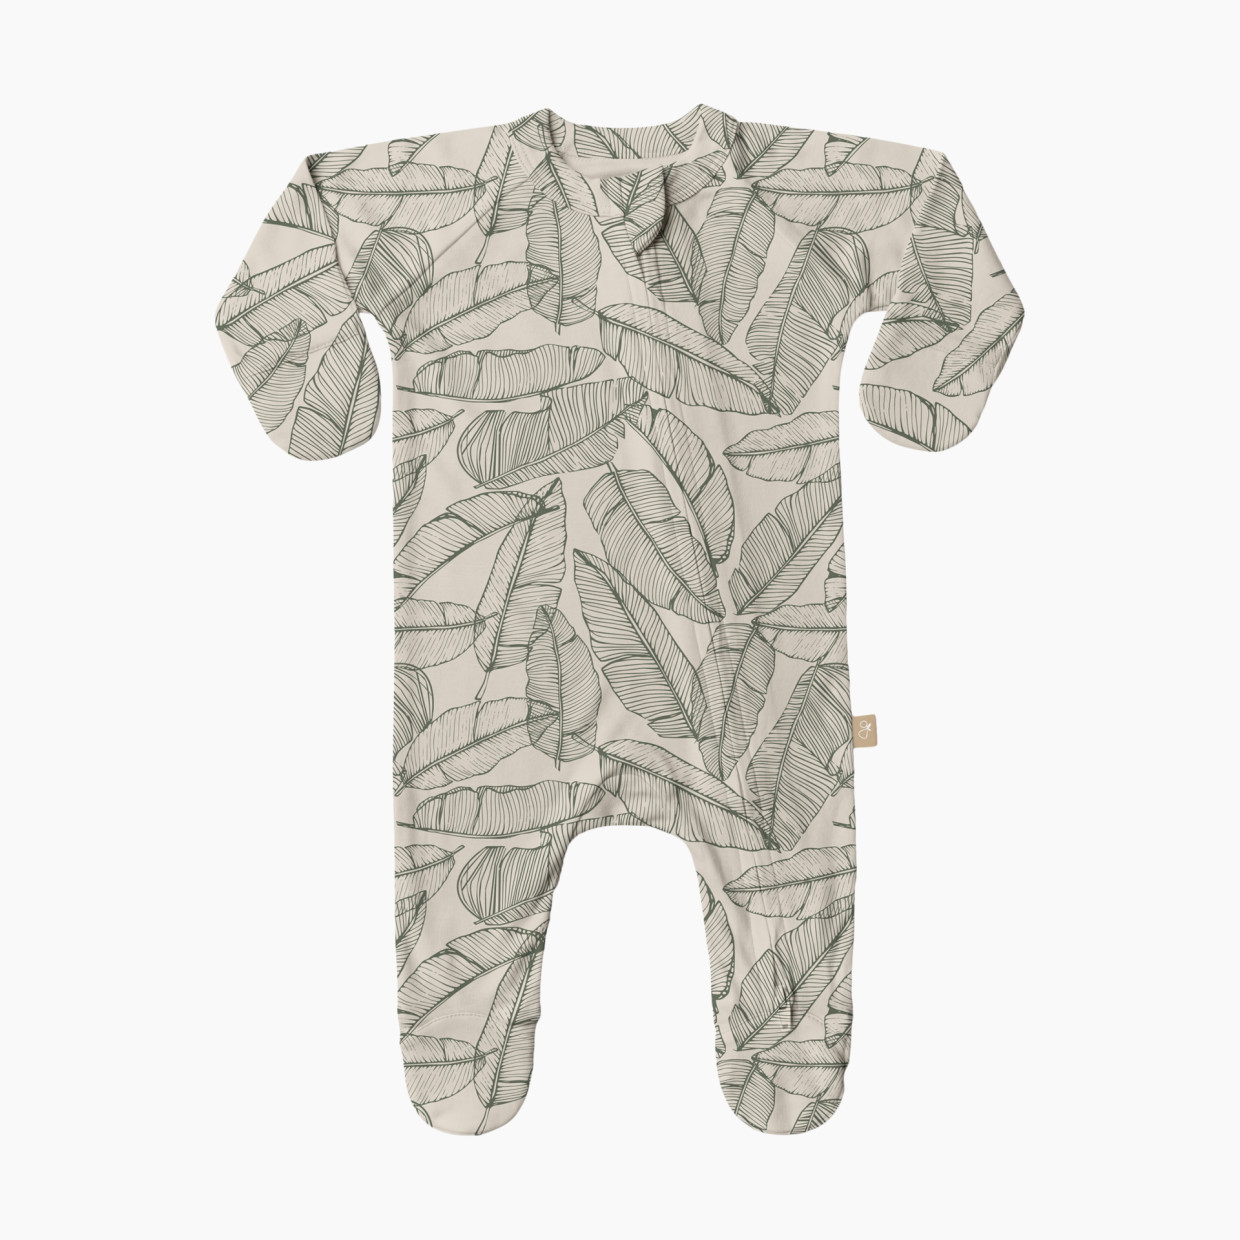 Goumi Kids x Babylist Grow With You Footie - Loose Fit - Banana Leaf, 0-3 M.